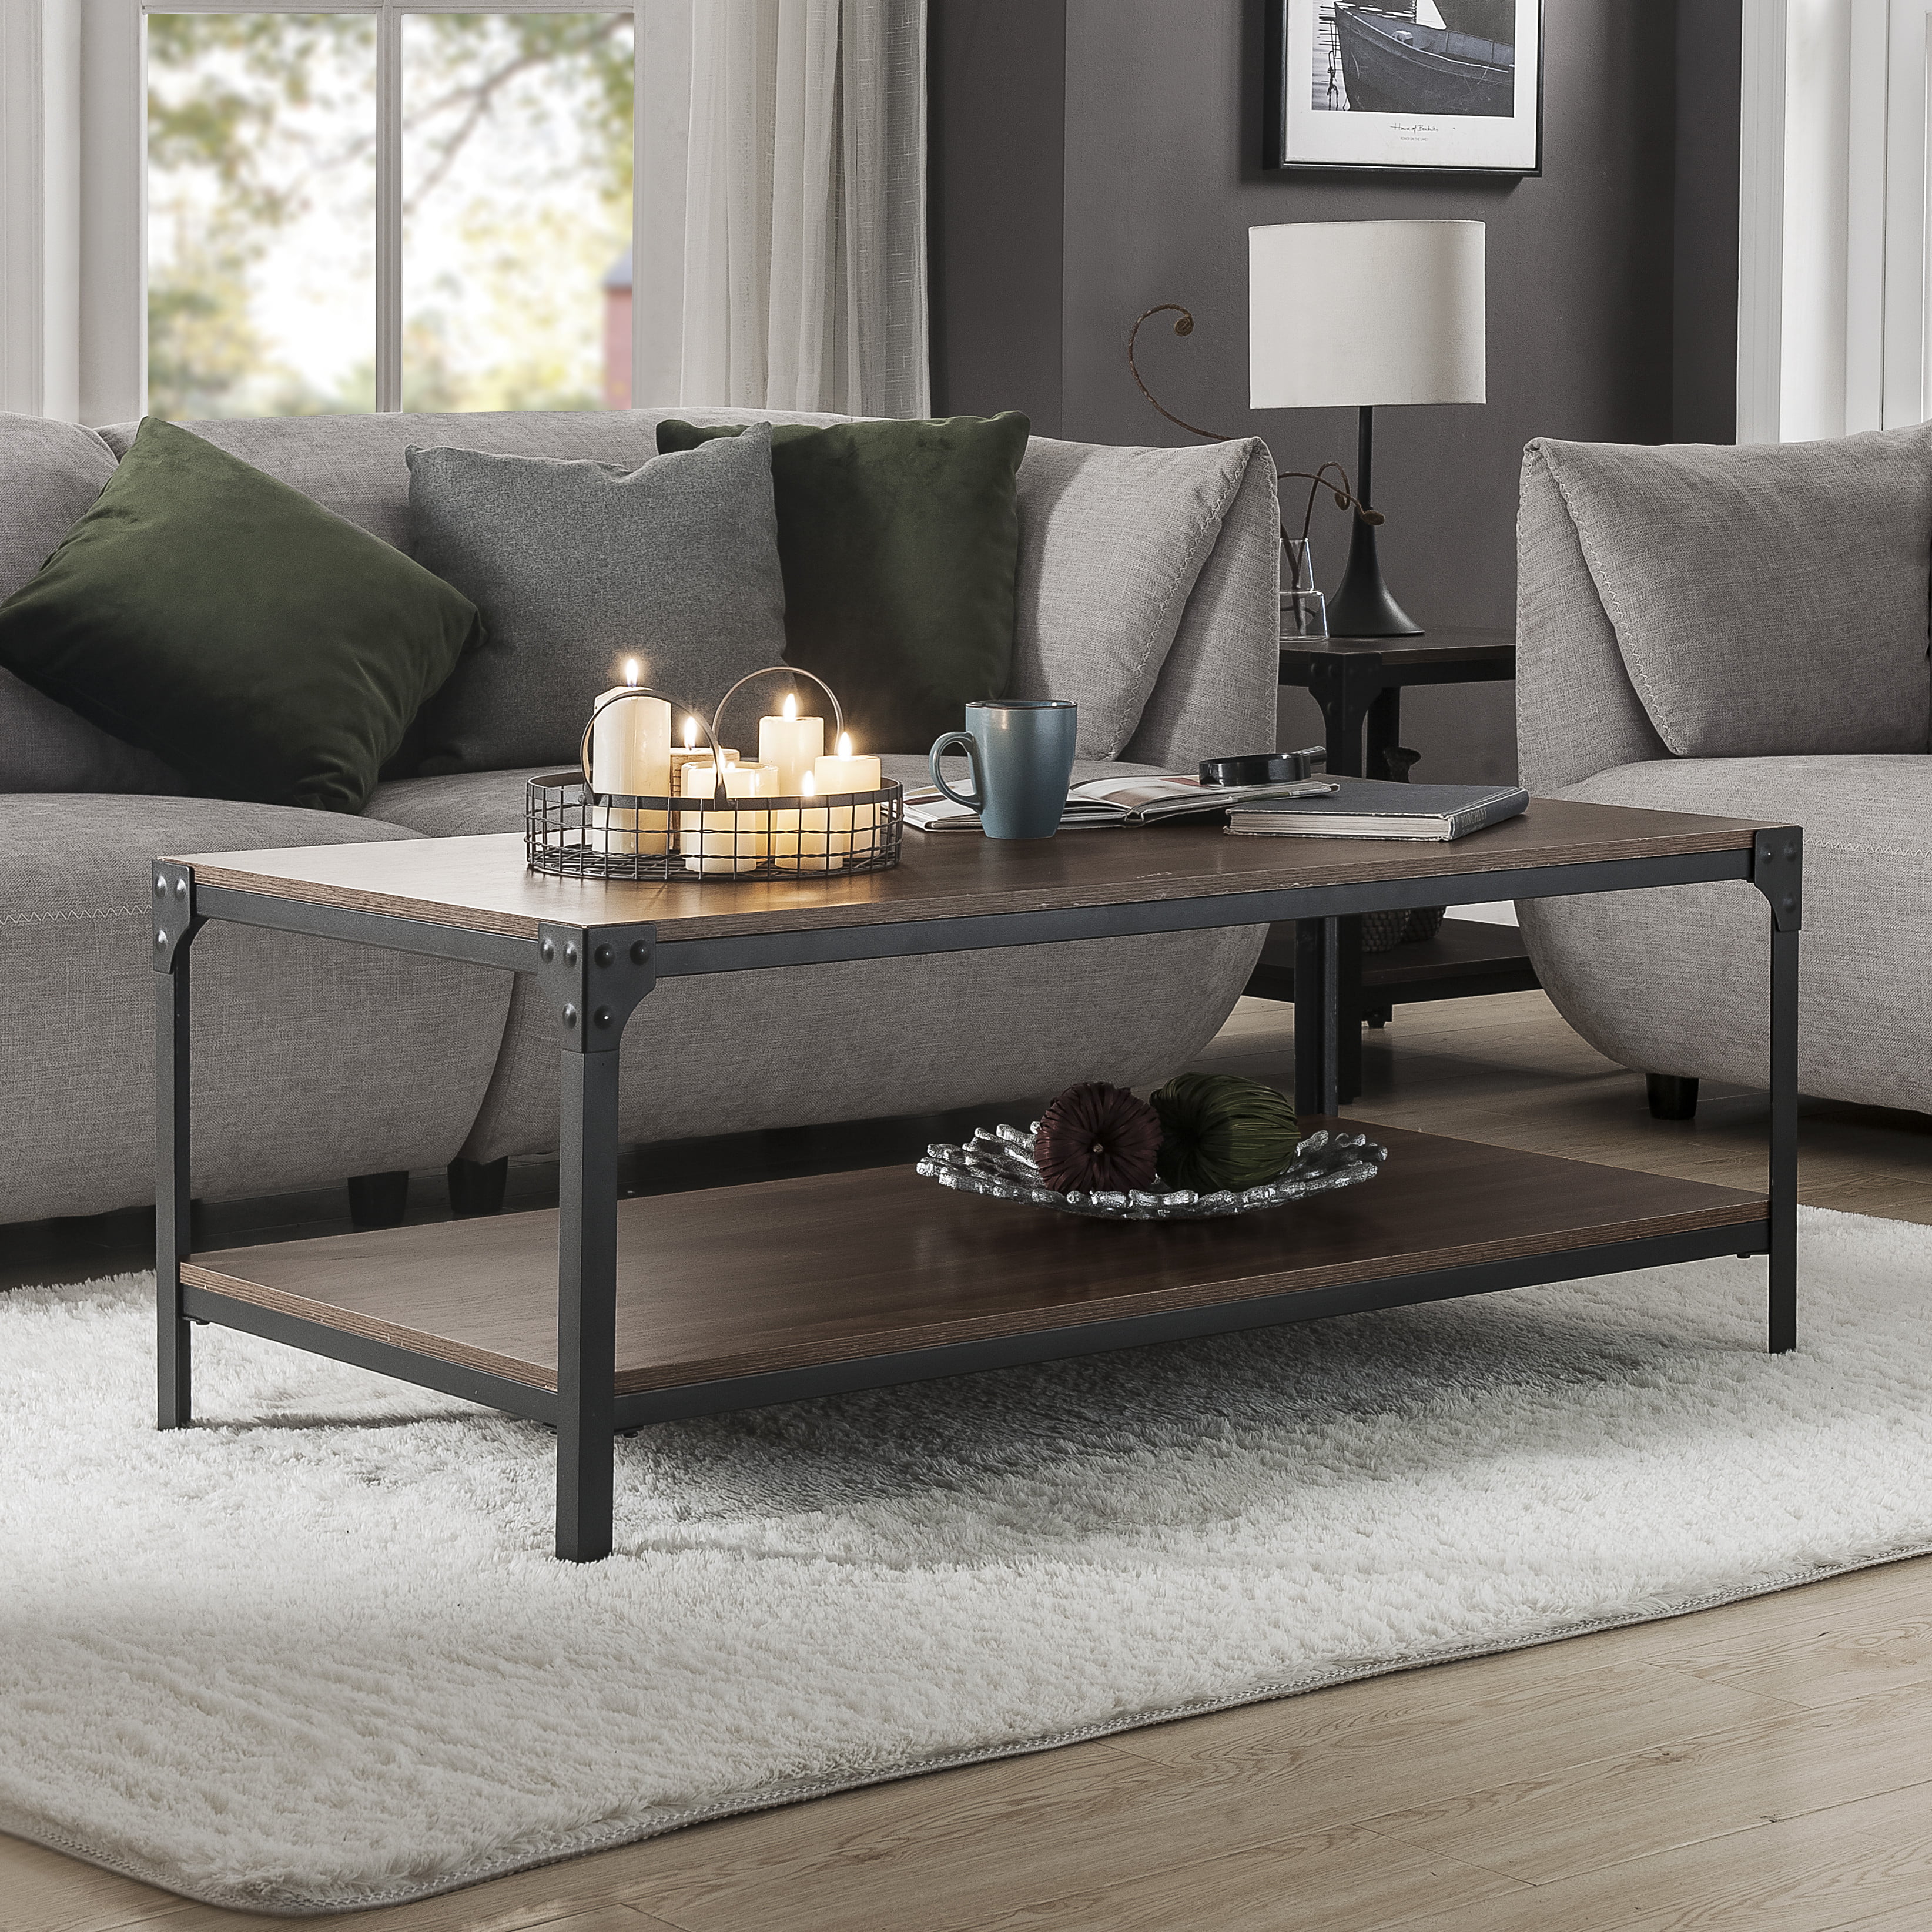 End Tables for Living Room, Mid-Century Rustic Coffee Table with